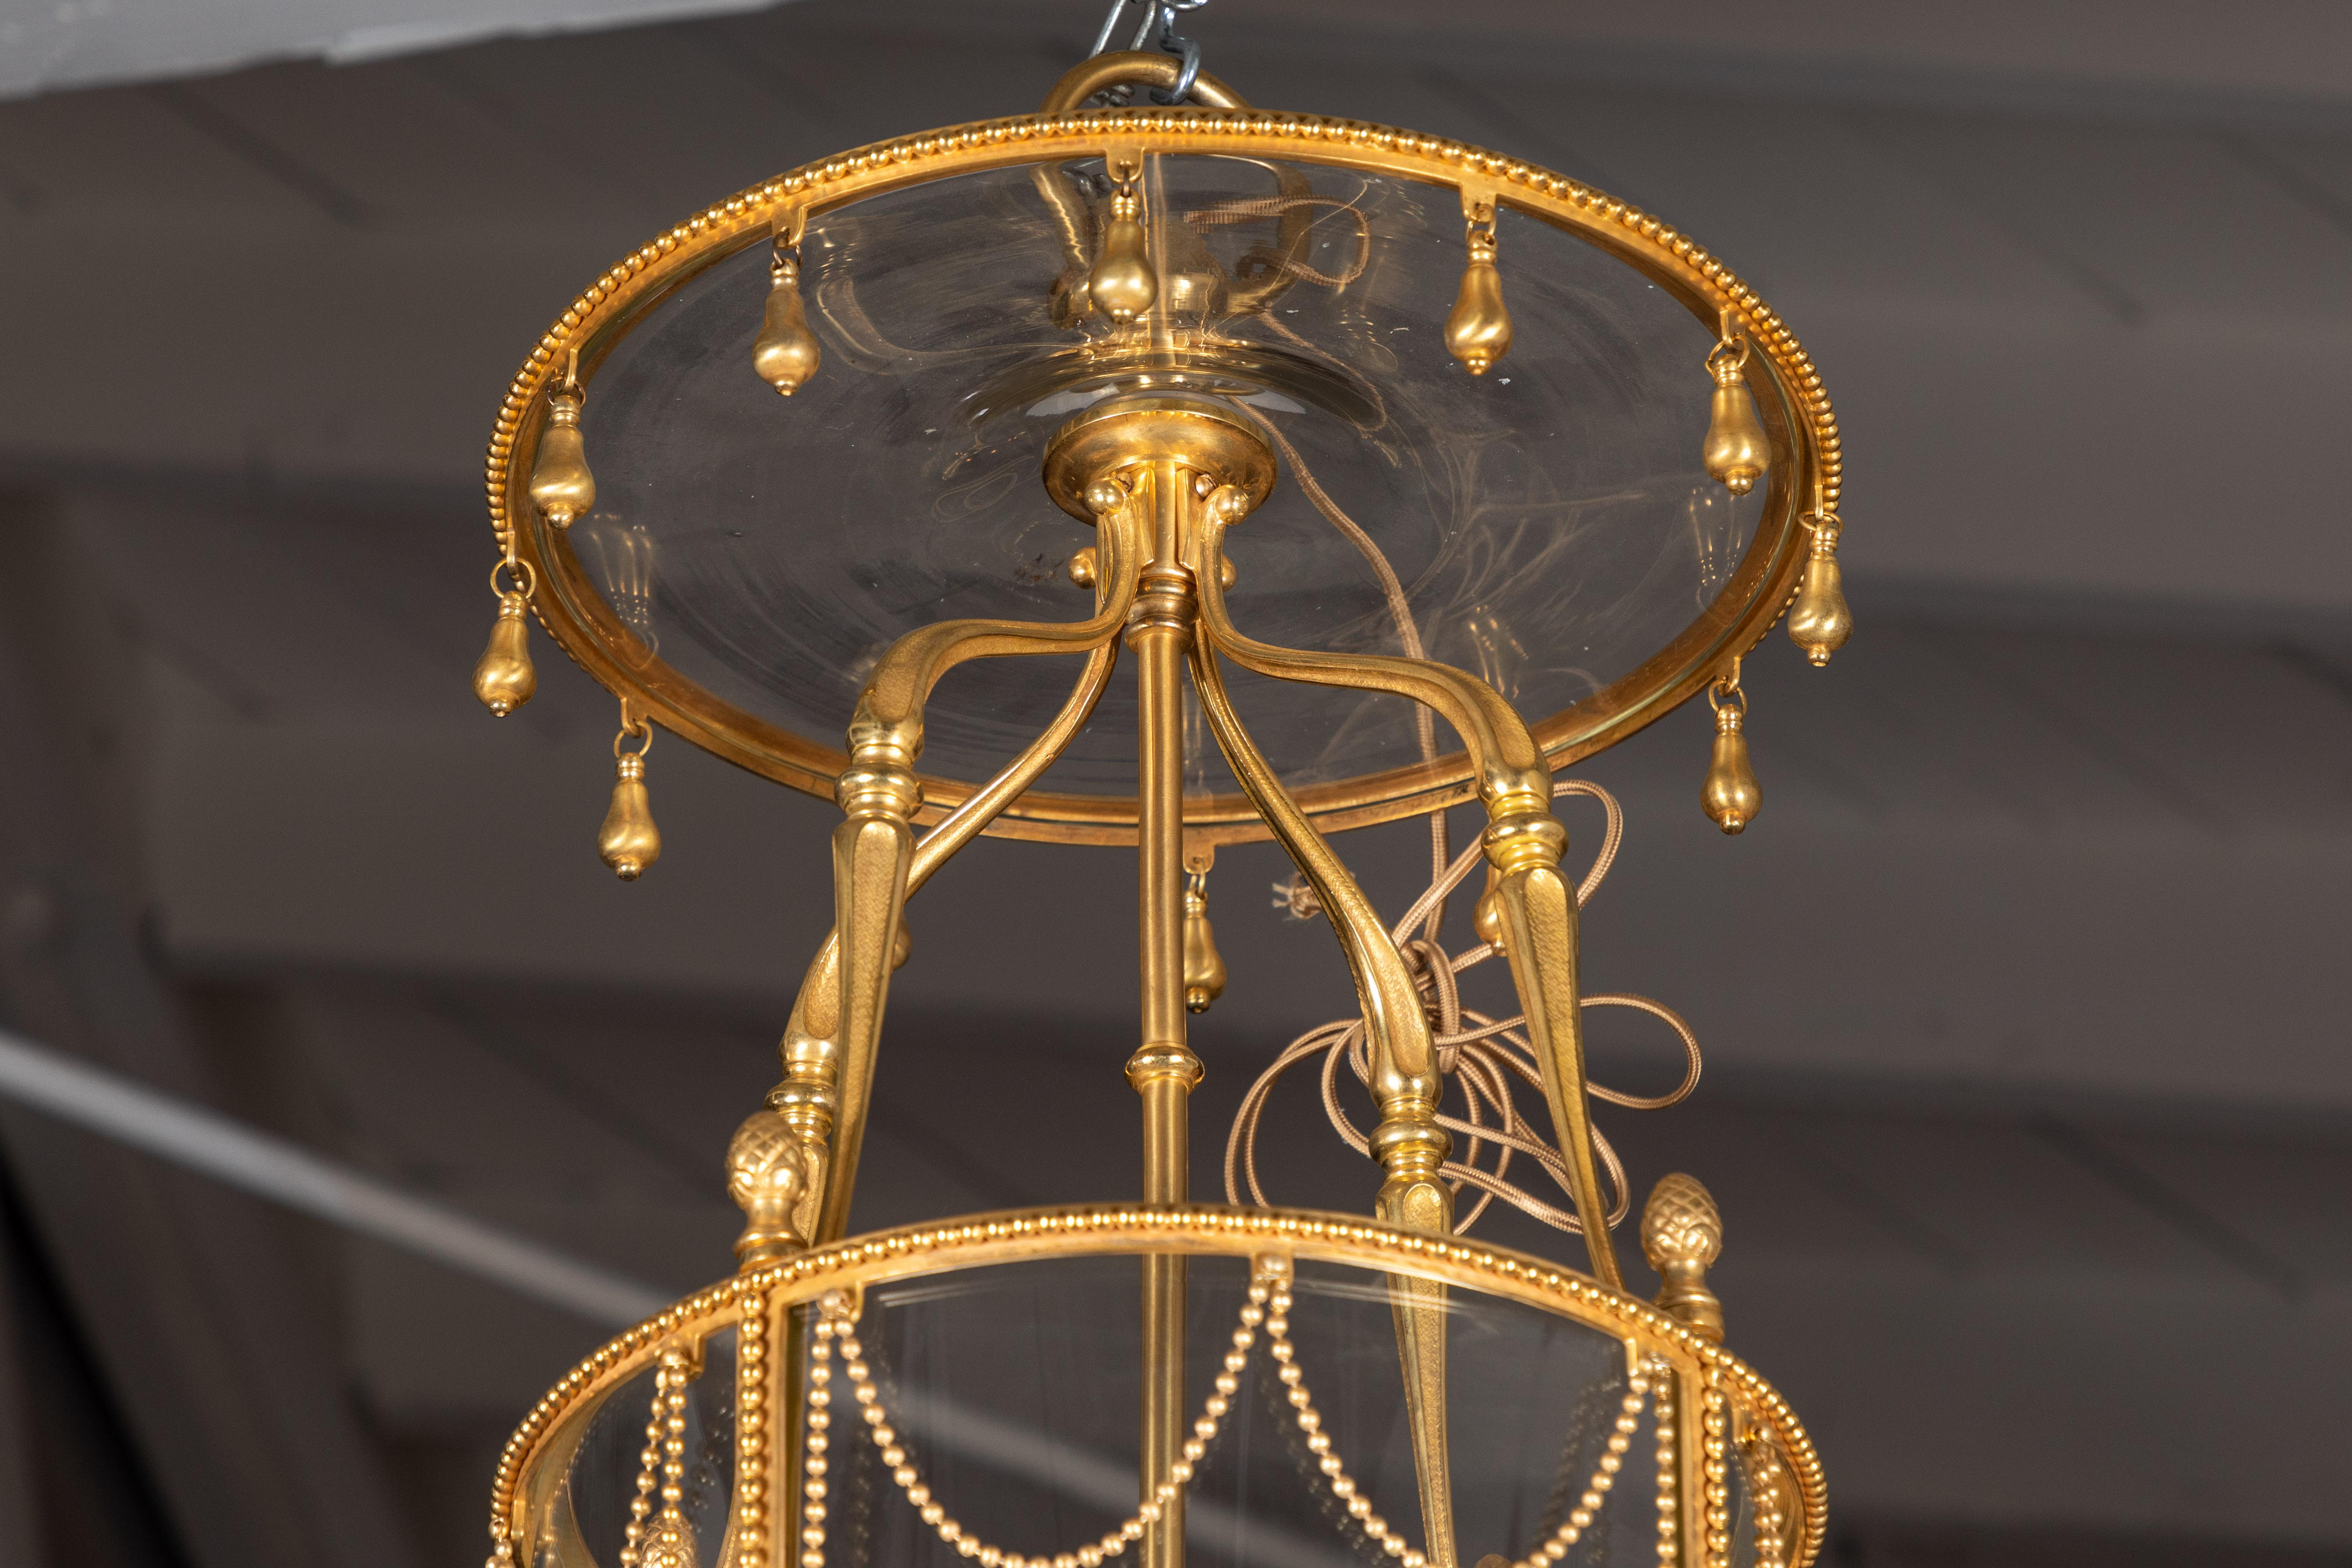 A glittering, four light, 19th c., French carriage lantern with a bronze doré frame featuring a canopy with gilded drops. The barrel-form body surmounted by a series of chain swags punctuated by beautifully molded tassels, and then capped by